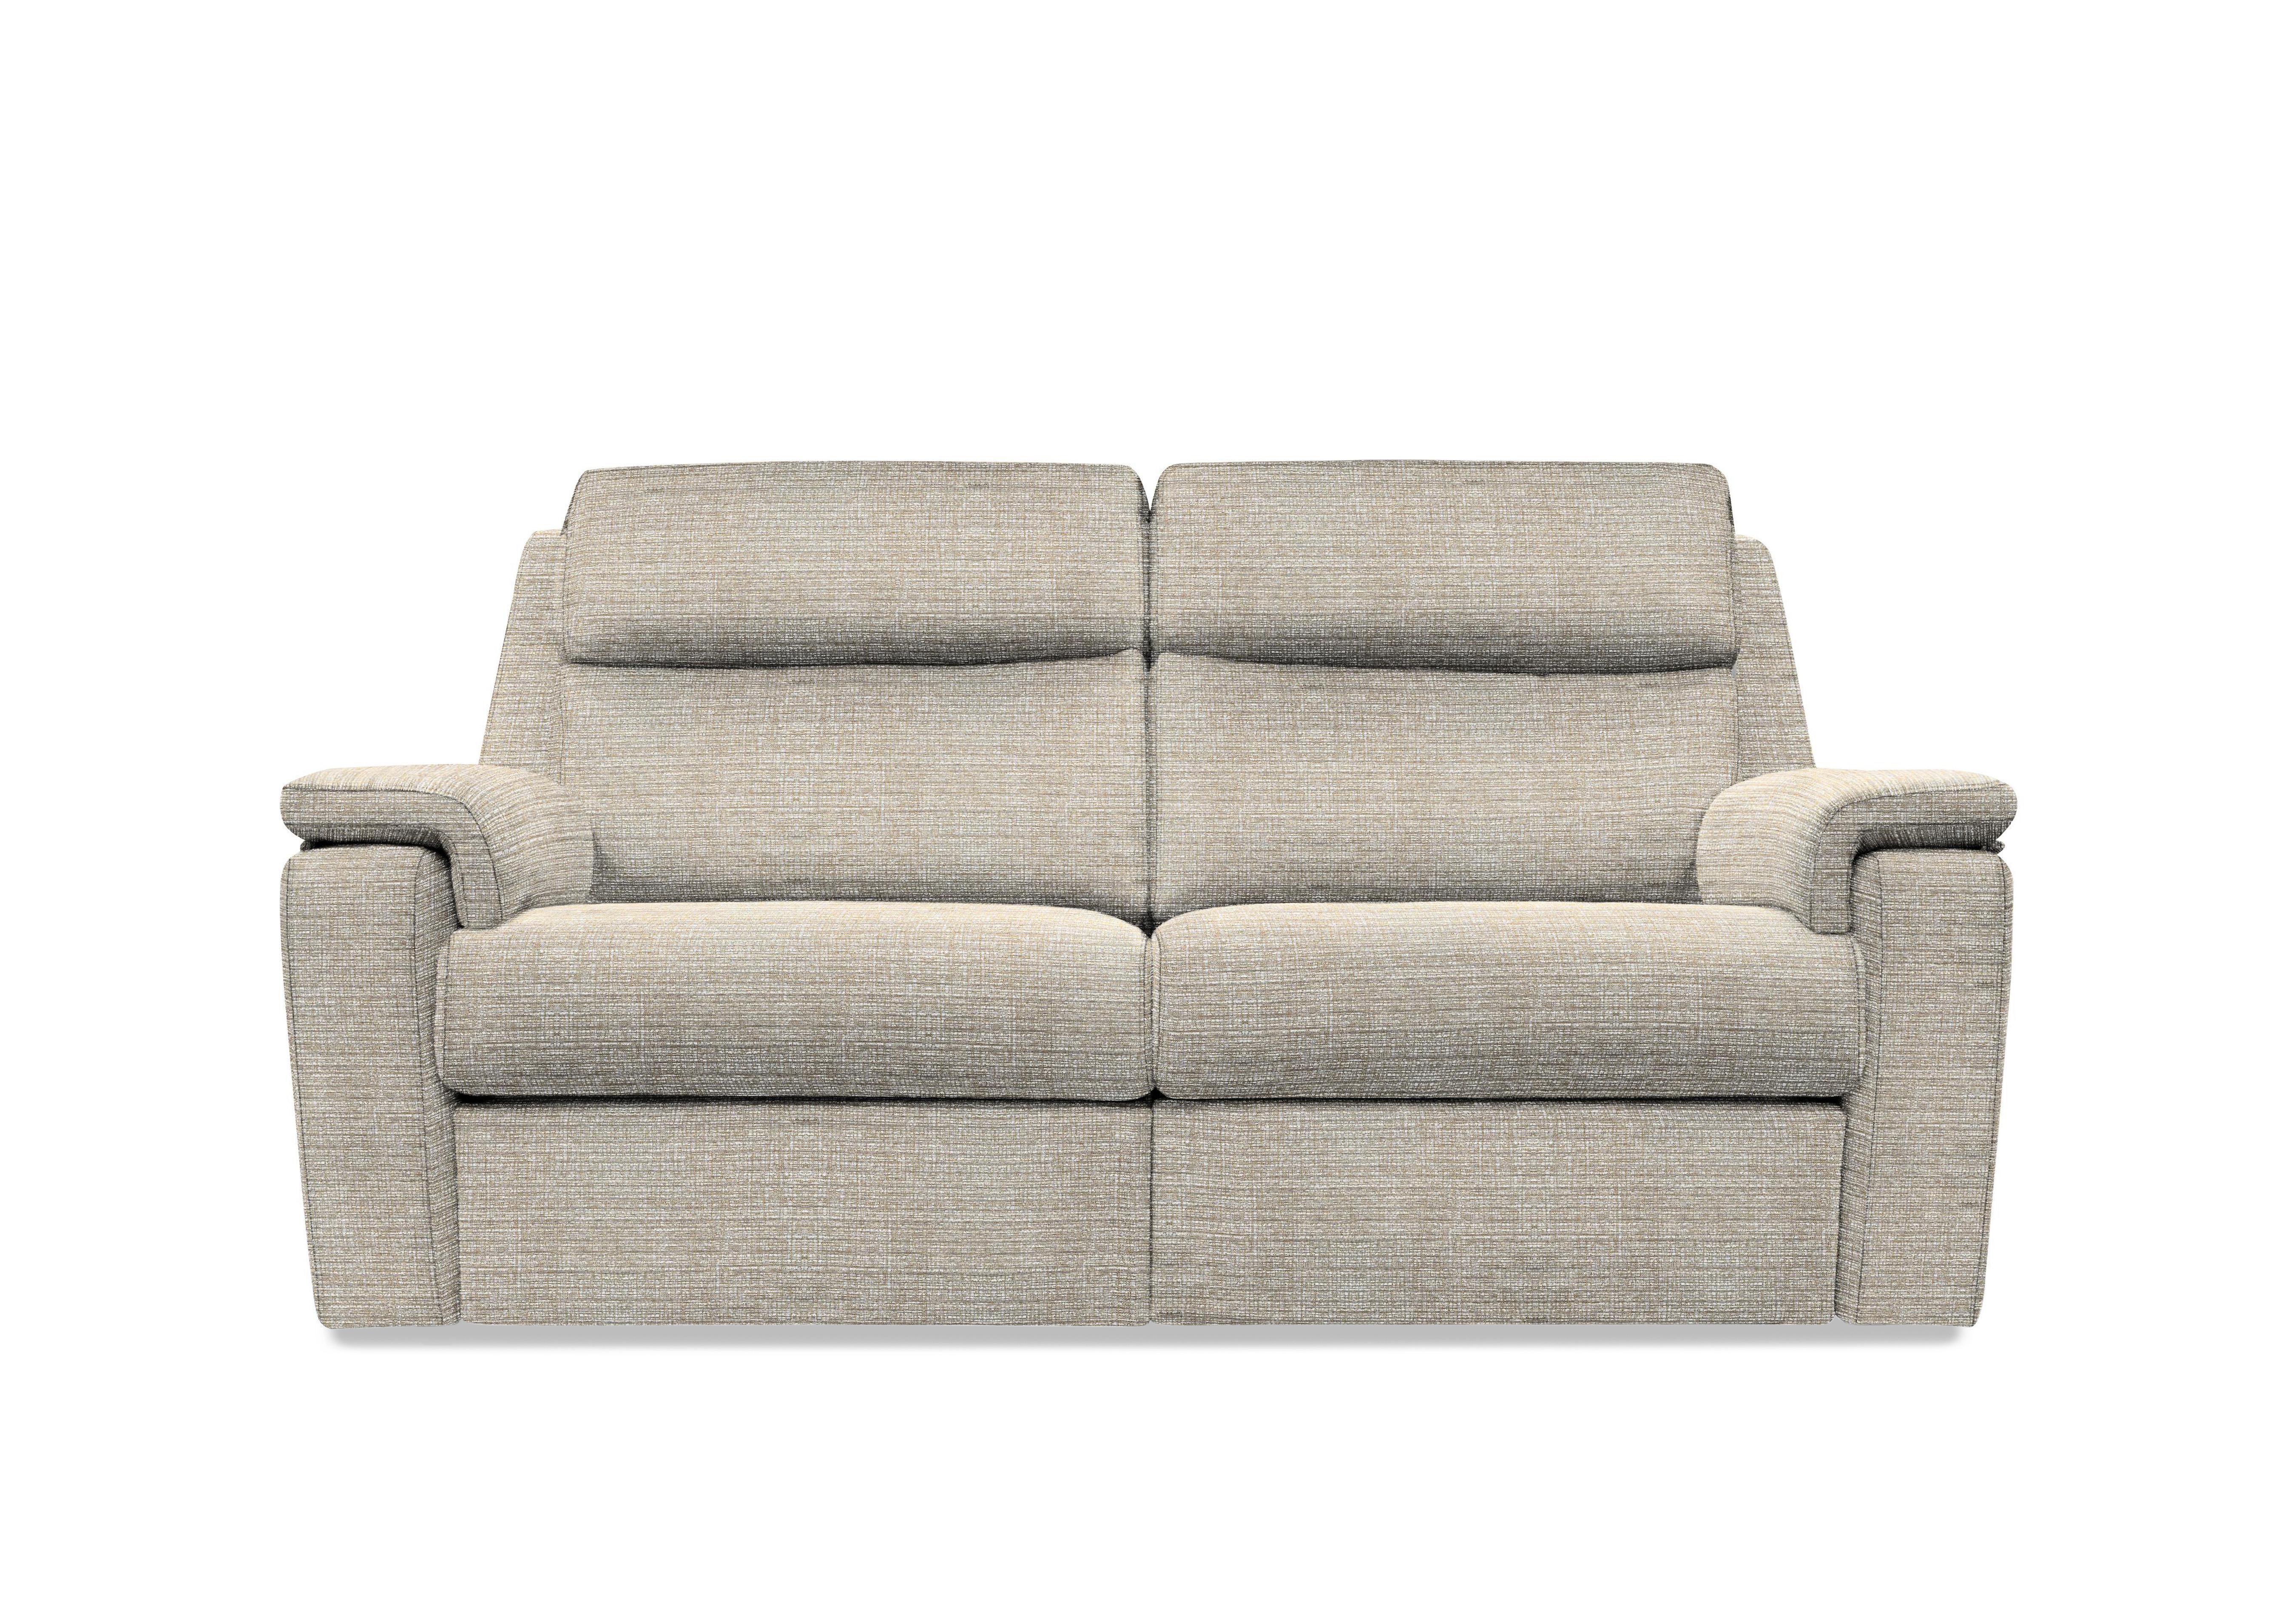 Thornbury 3 Seater Fabric Power Recliner Sofa with Power Headrests and Power Lumbar in A006 Yarn Shale on Furniture Village